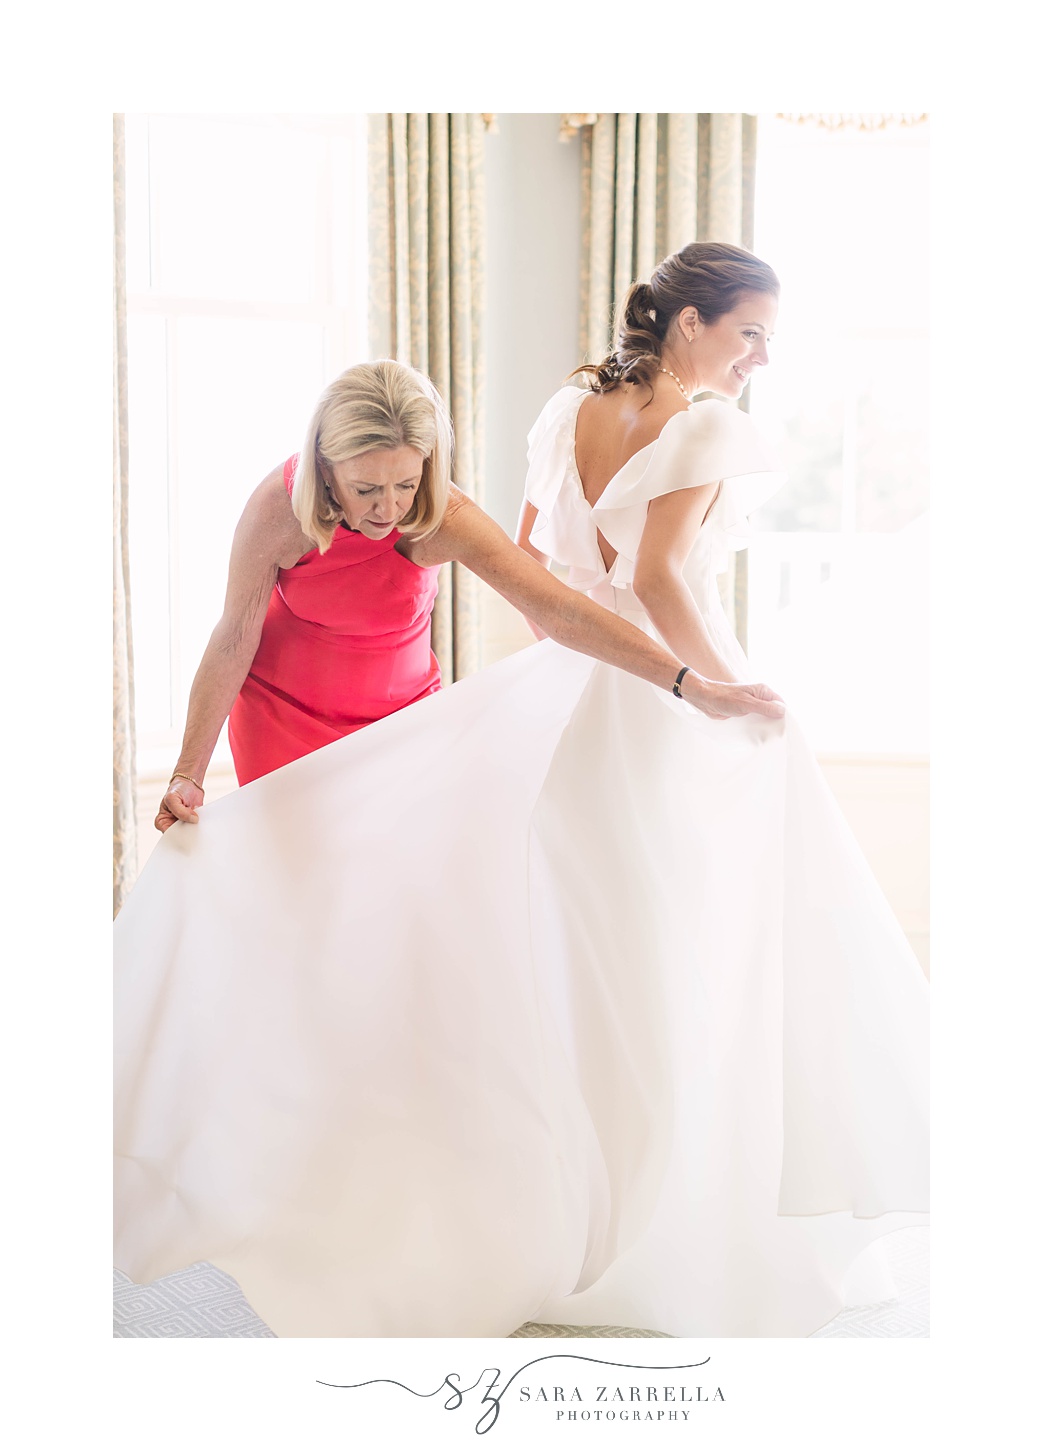 mother of the bride helps bride with wedding dress